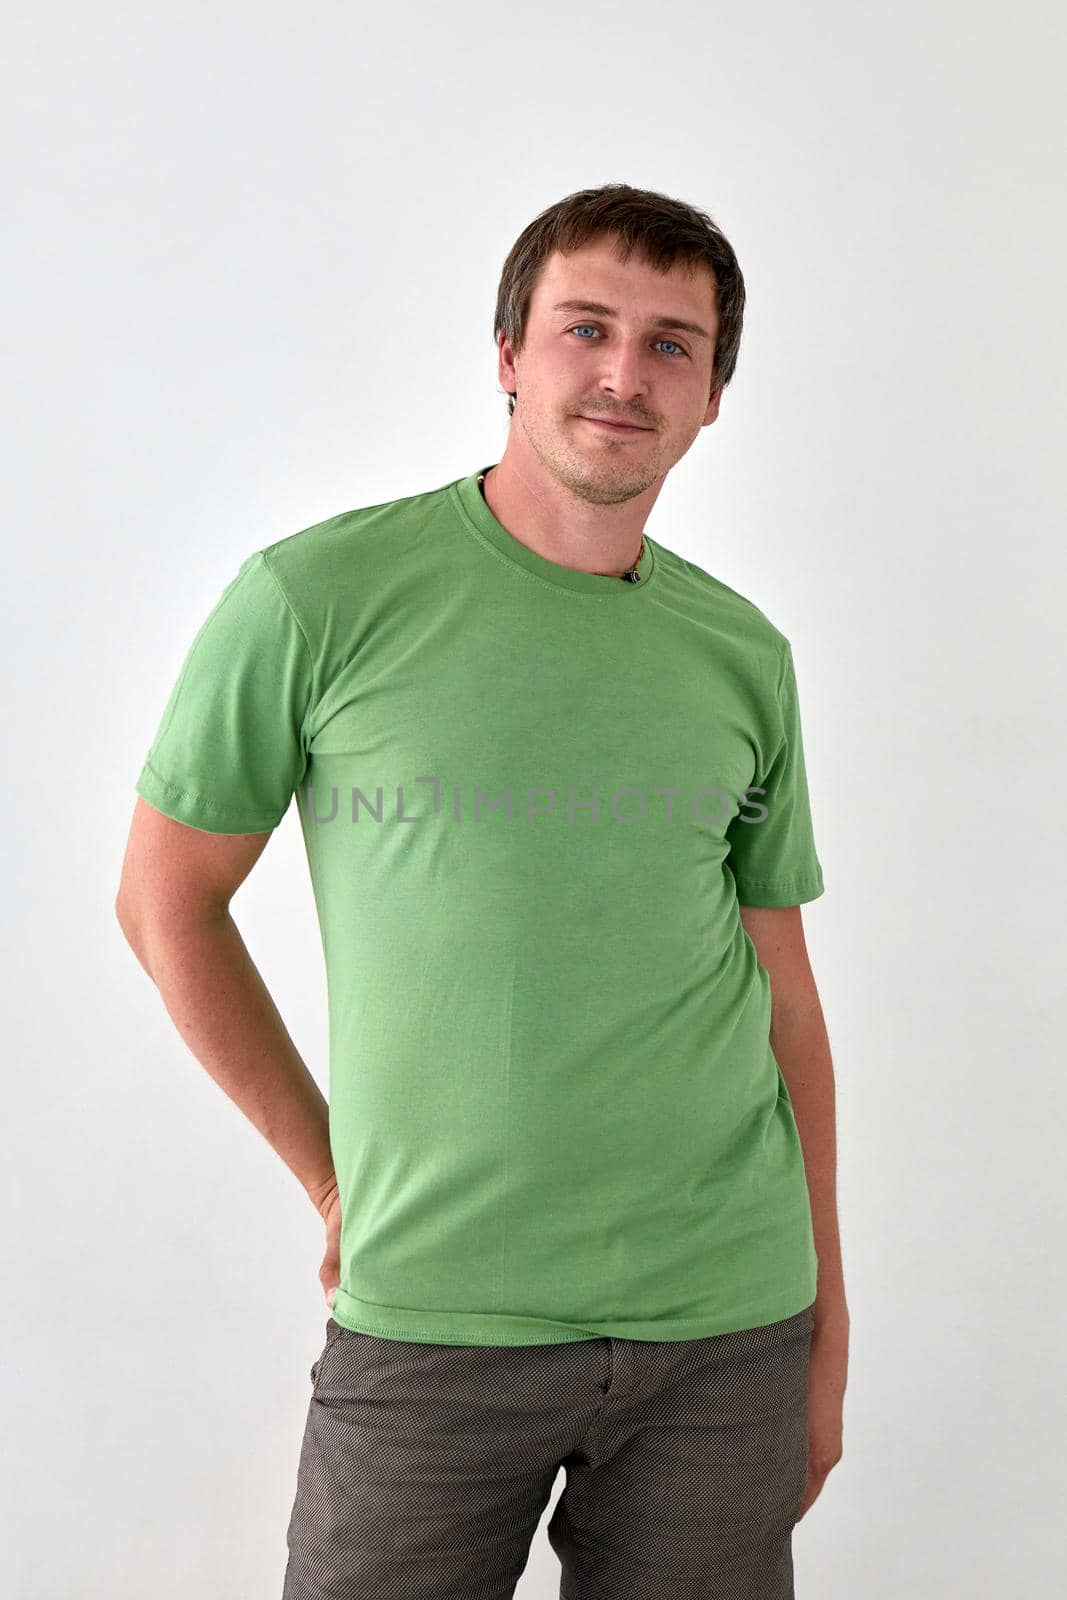 Positive young man in casual outfit standing on white background by Demkat